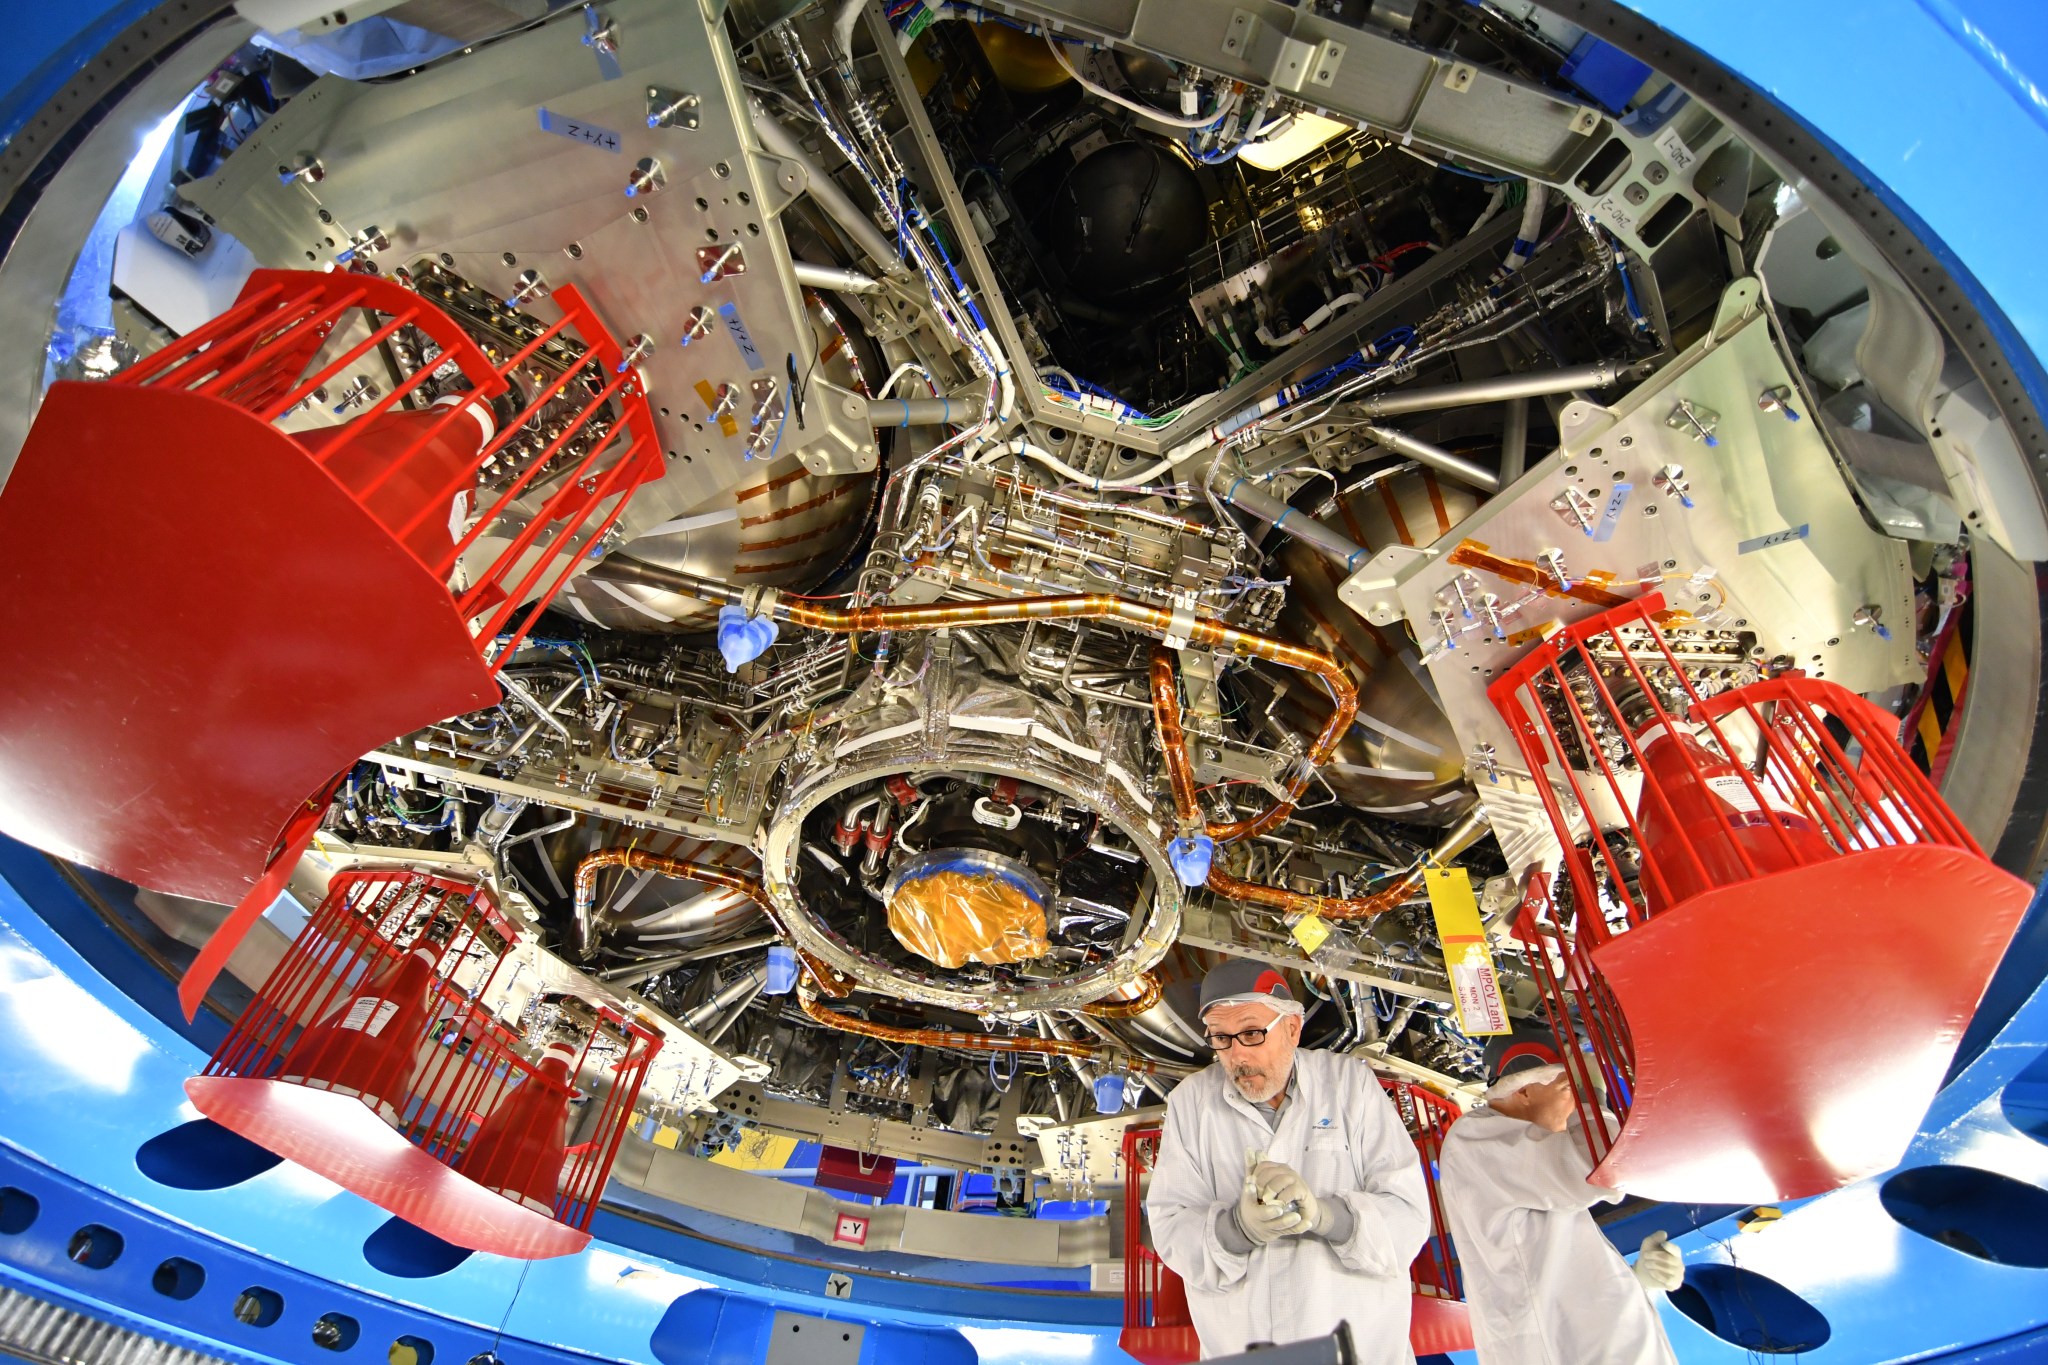 Technicians work underneath the European Service Module for NASA’s Orion spacecraft to complete final preparations